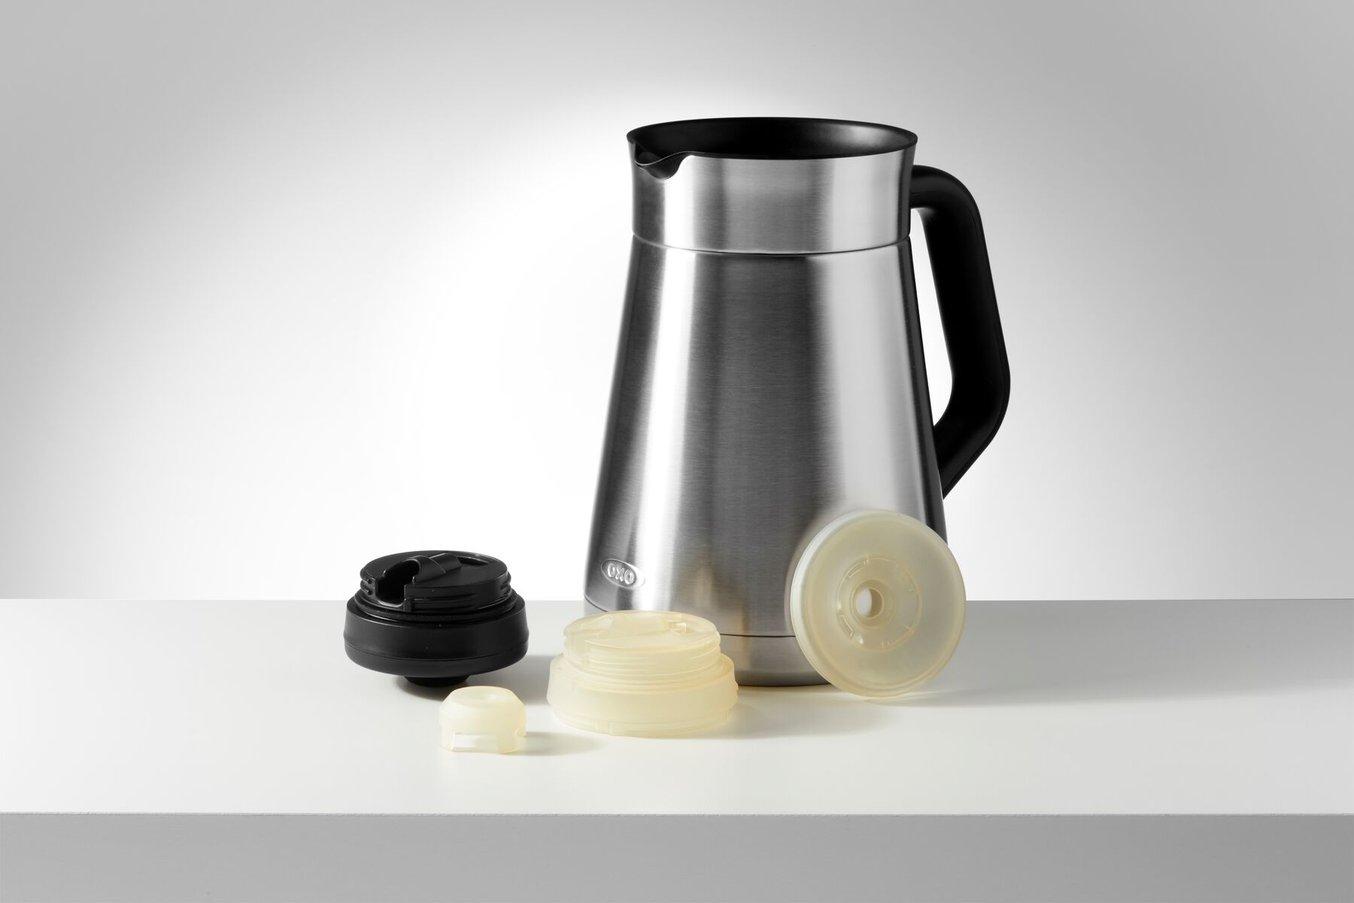 the OXO coffeemaker with 3D printed component in the lid